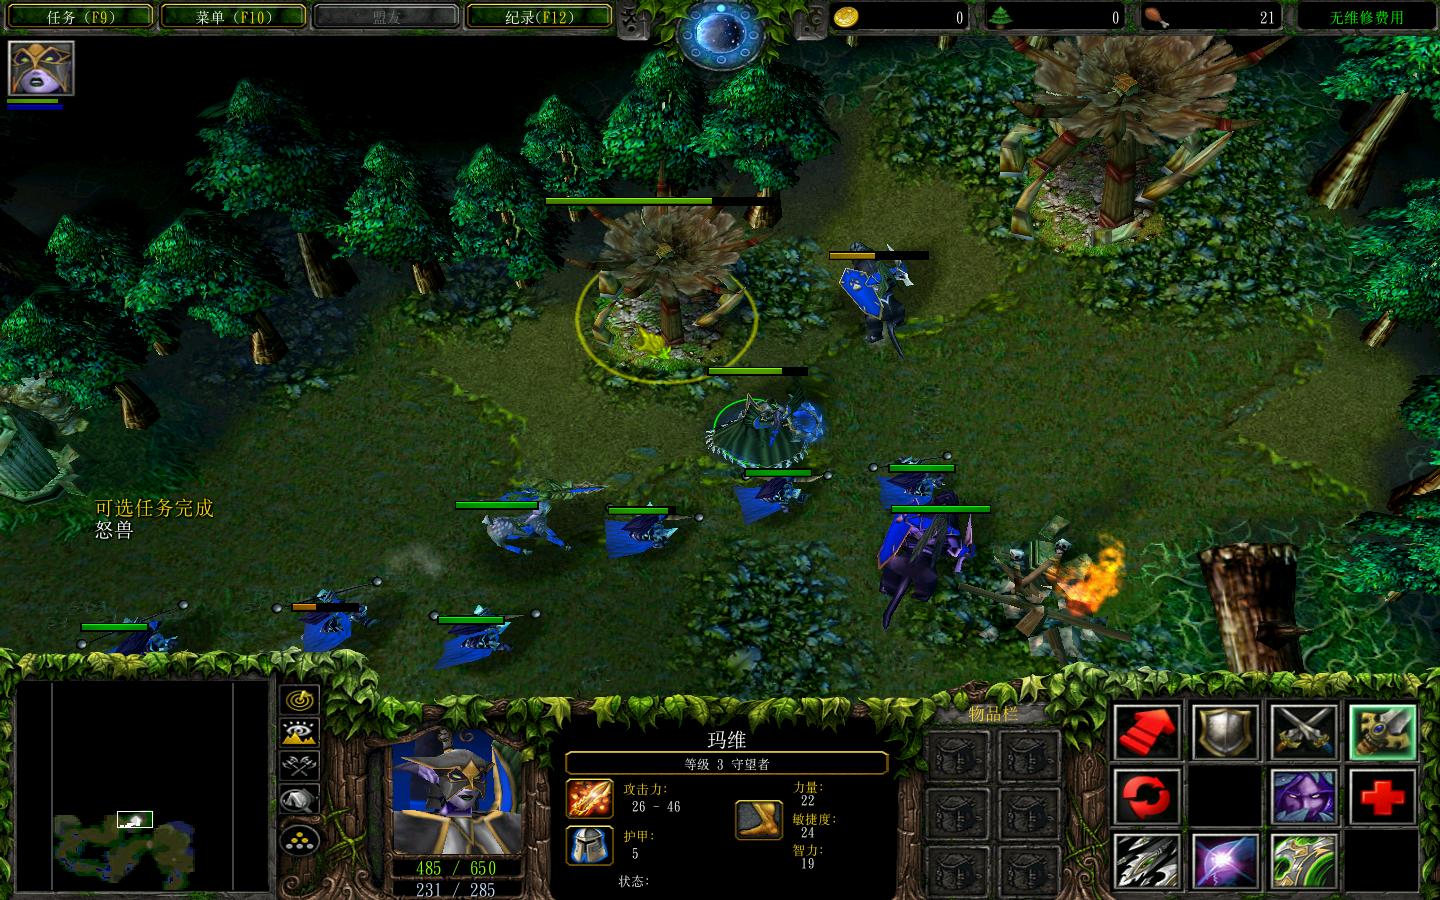 ħ3Warcraft III The Frozen Thronev1.24޾v1.0.17